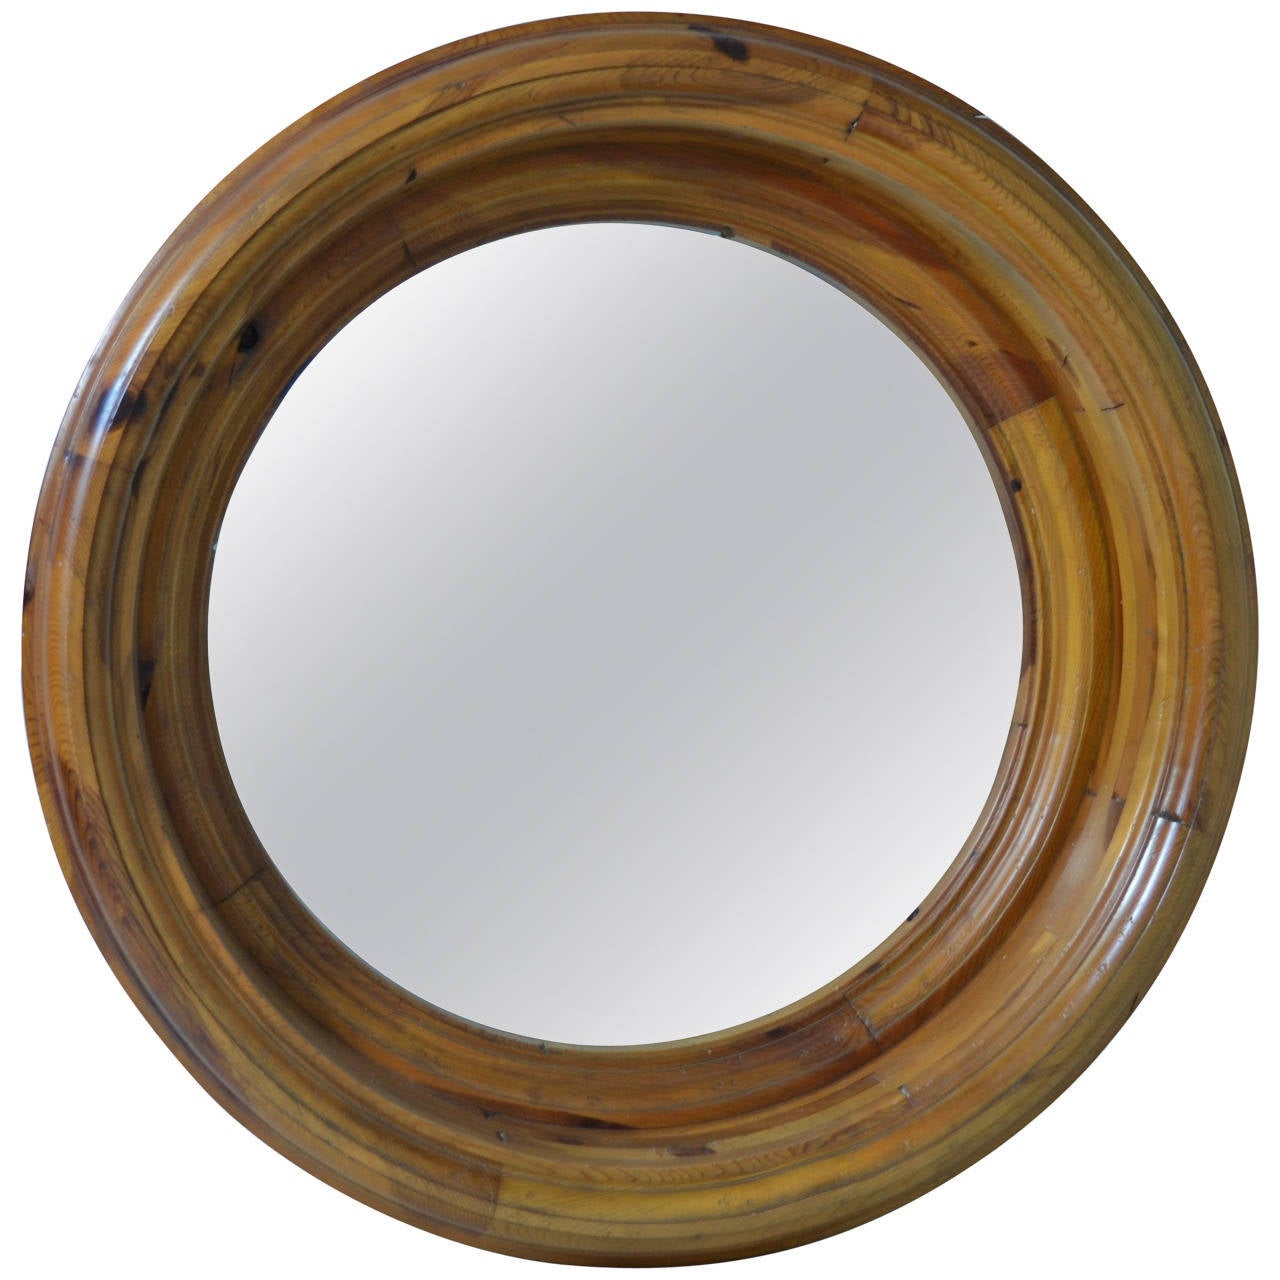 Very high quality, heavy wood porthole-style mirror by Ralph Lauren home collection with deeply recessed glass. Rich wood character, impressive size: at inches in diameter and 11.5 inches depth. Big presence.